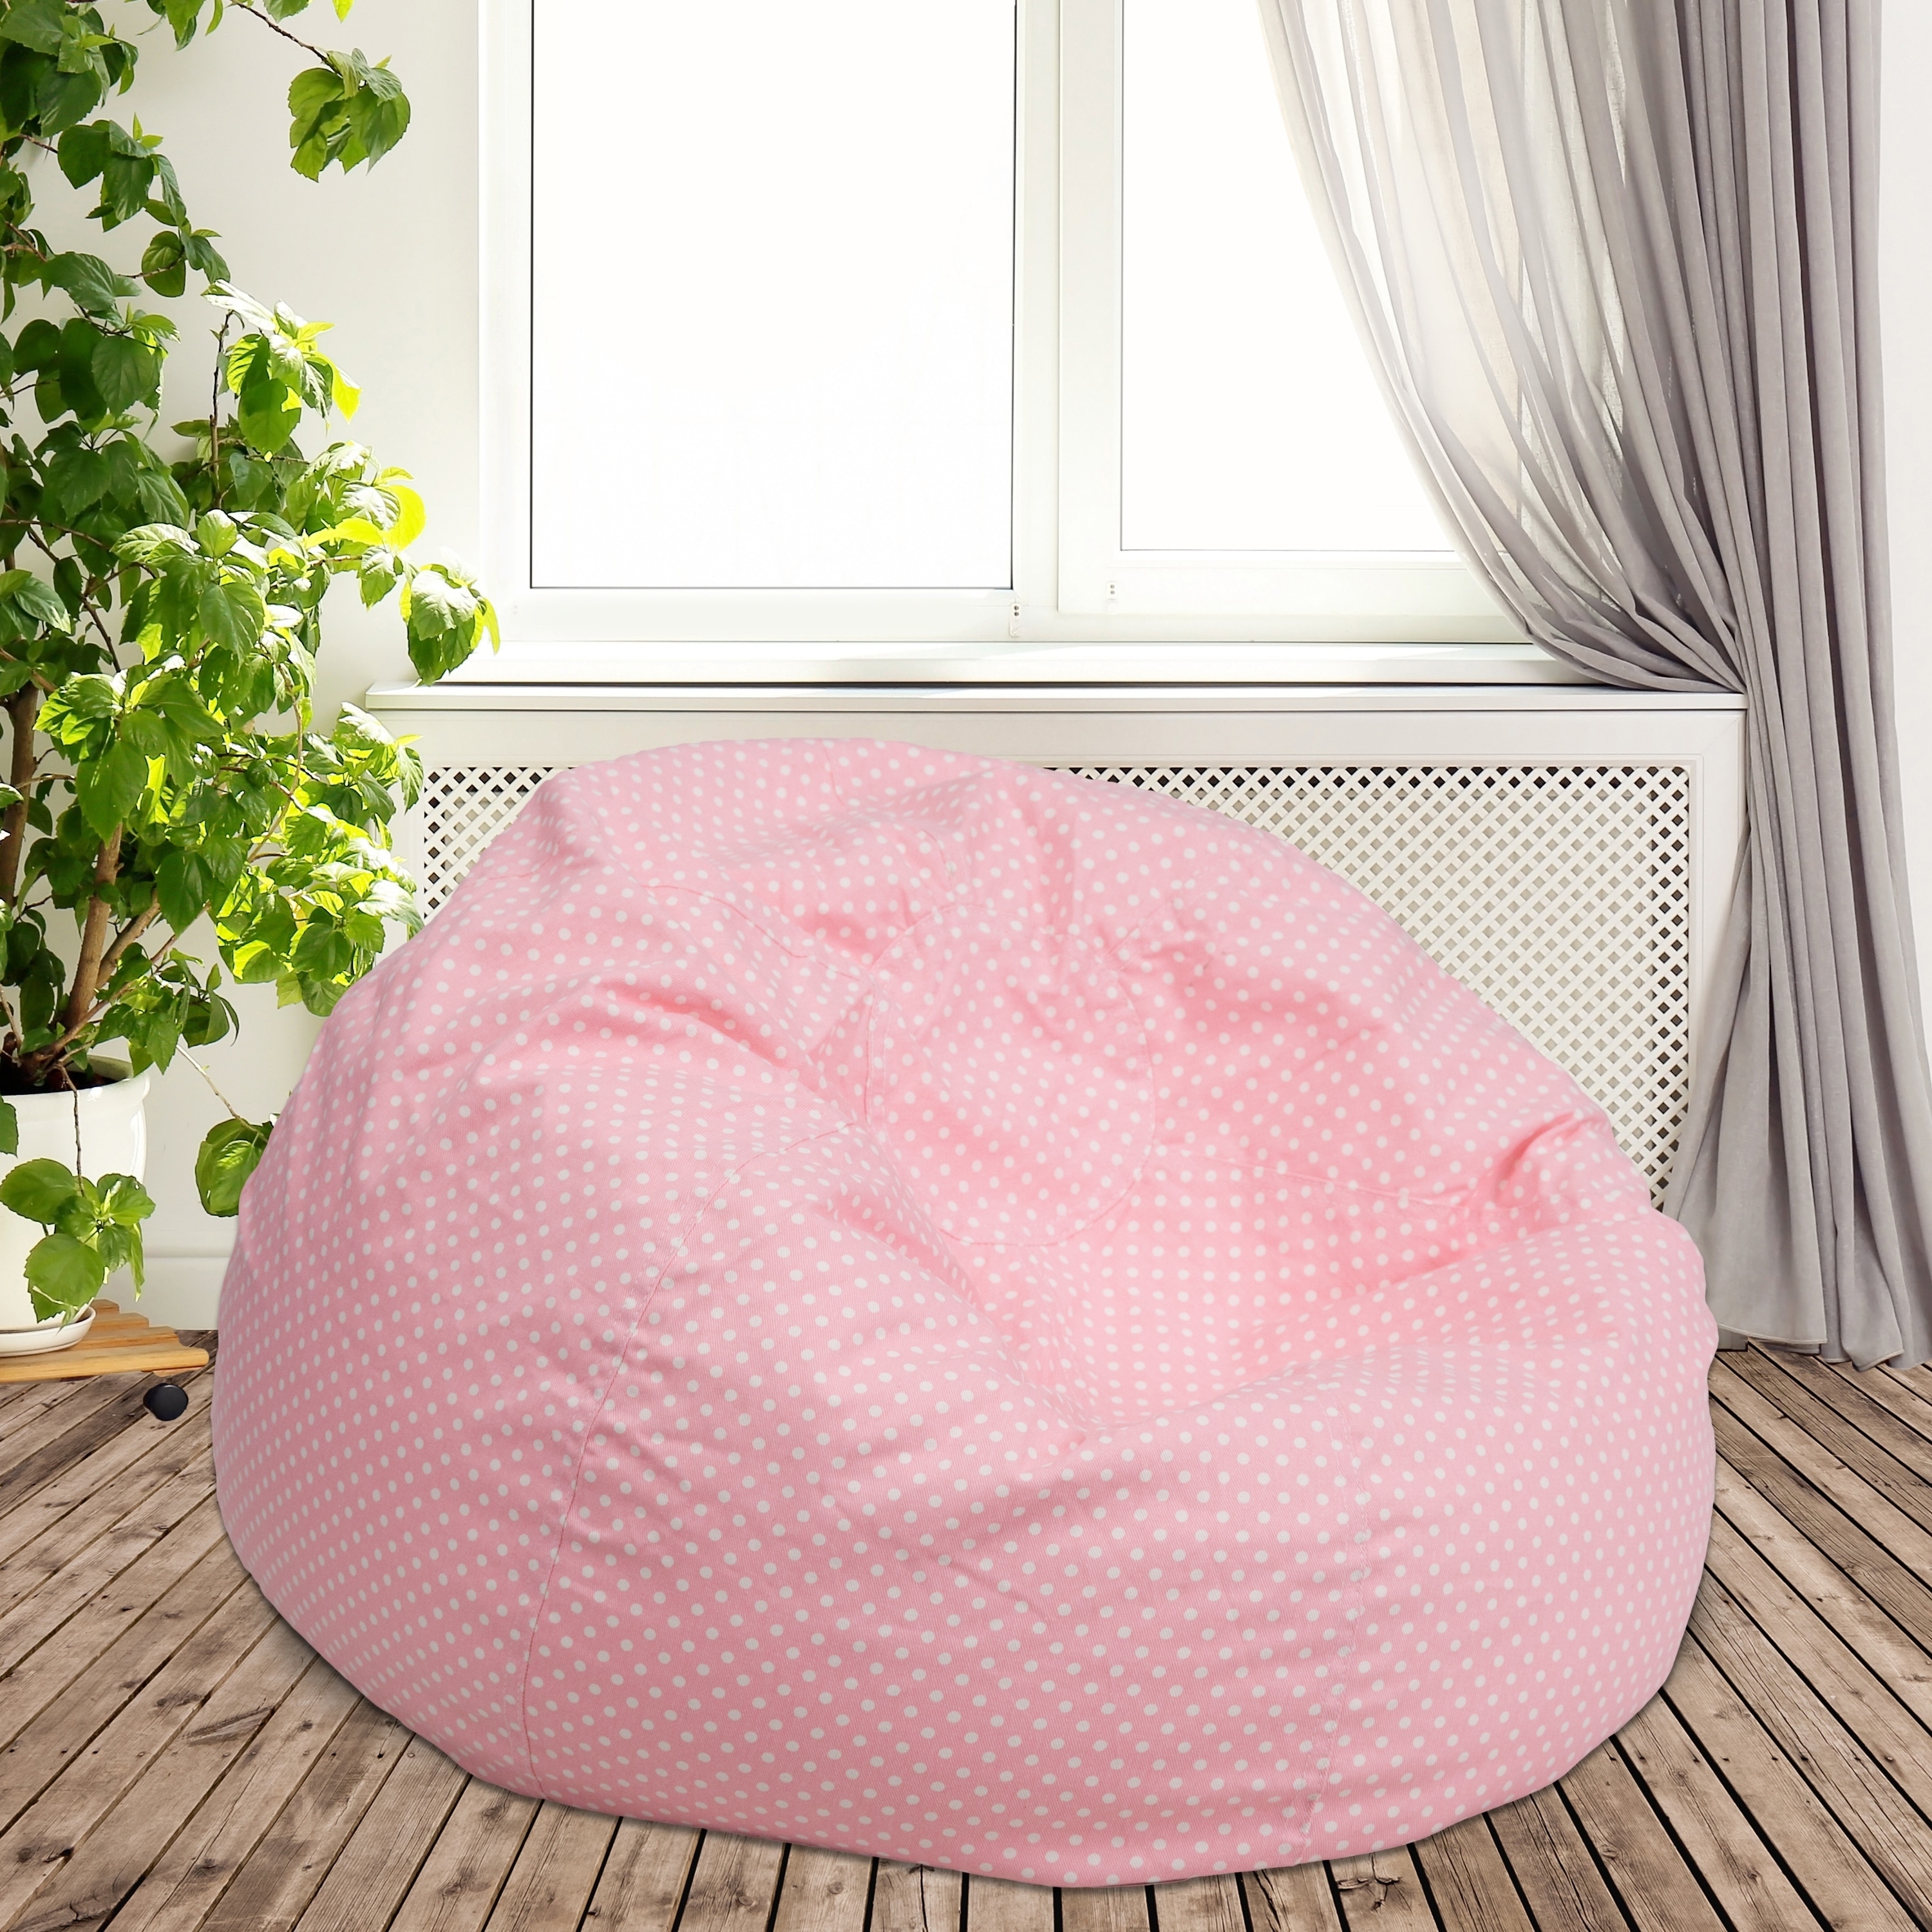 Shop Oversized Refillable Bean Bag Chair For Kids And Adults On